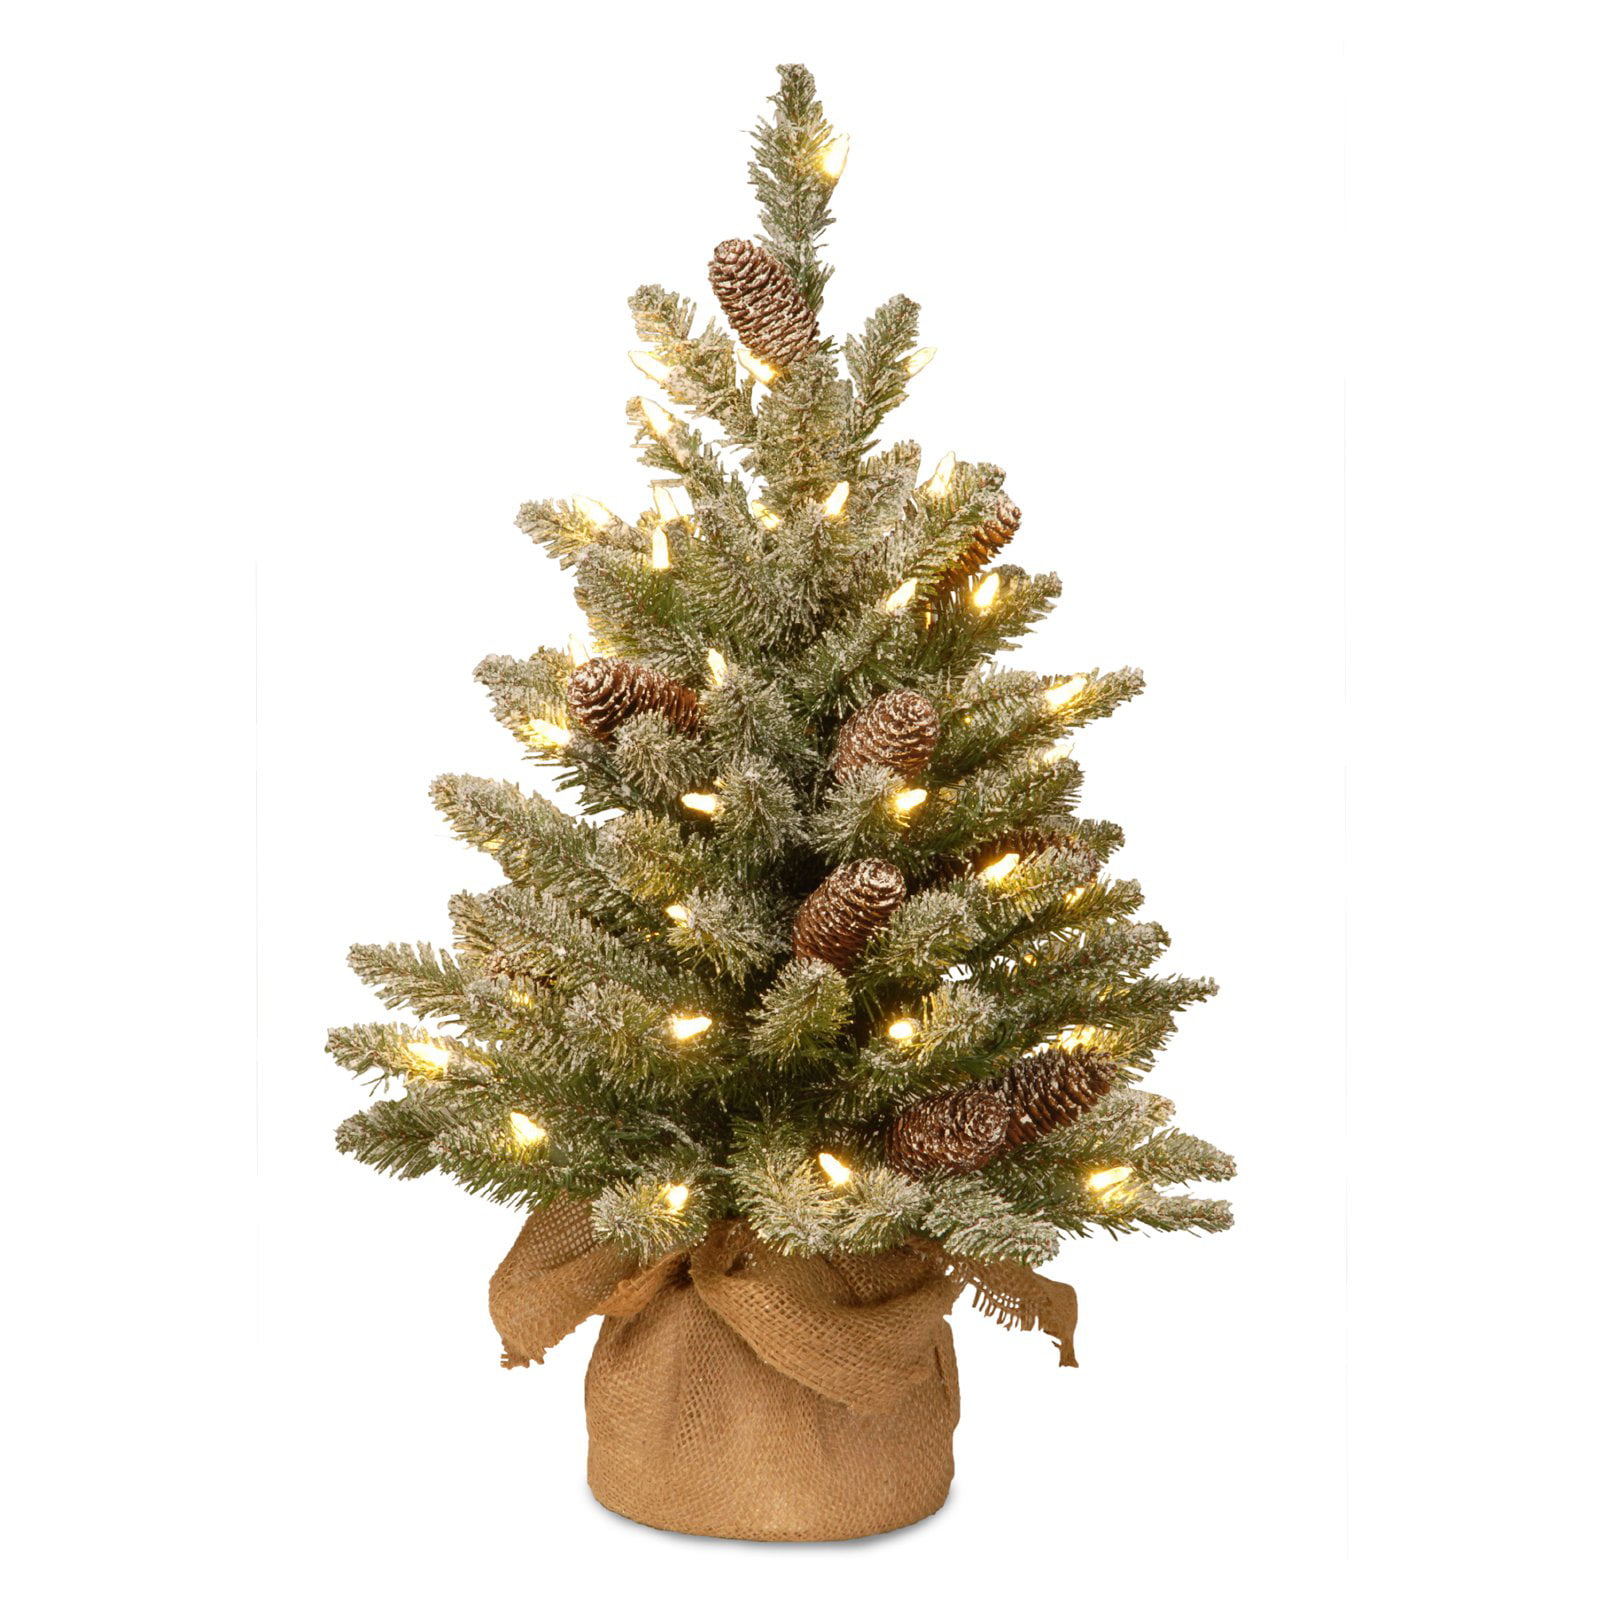 Snowy Concolor Fir Small Christmas Tree in Burlap with Snowy Cones ...